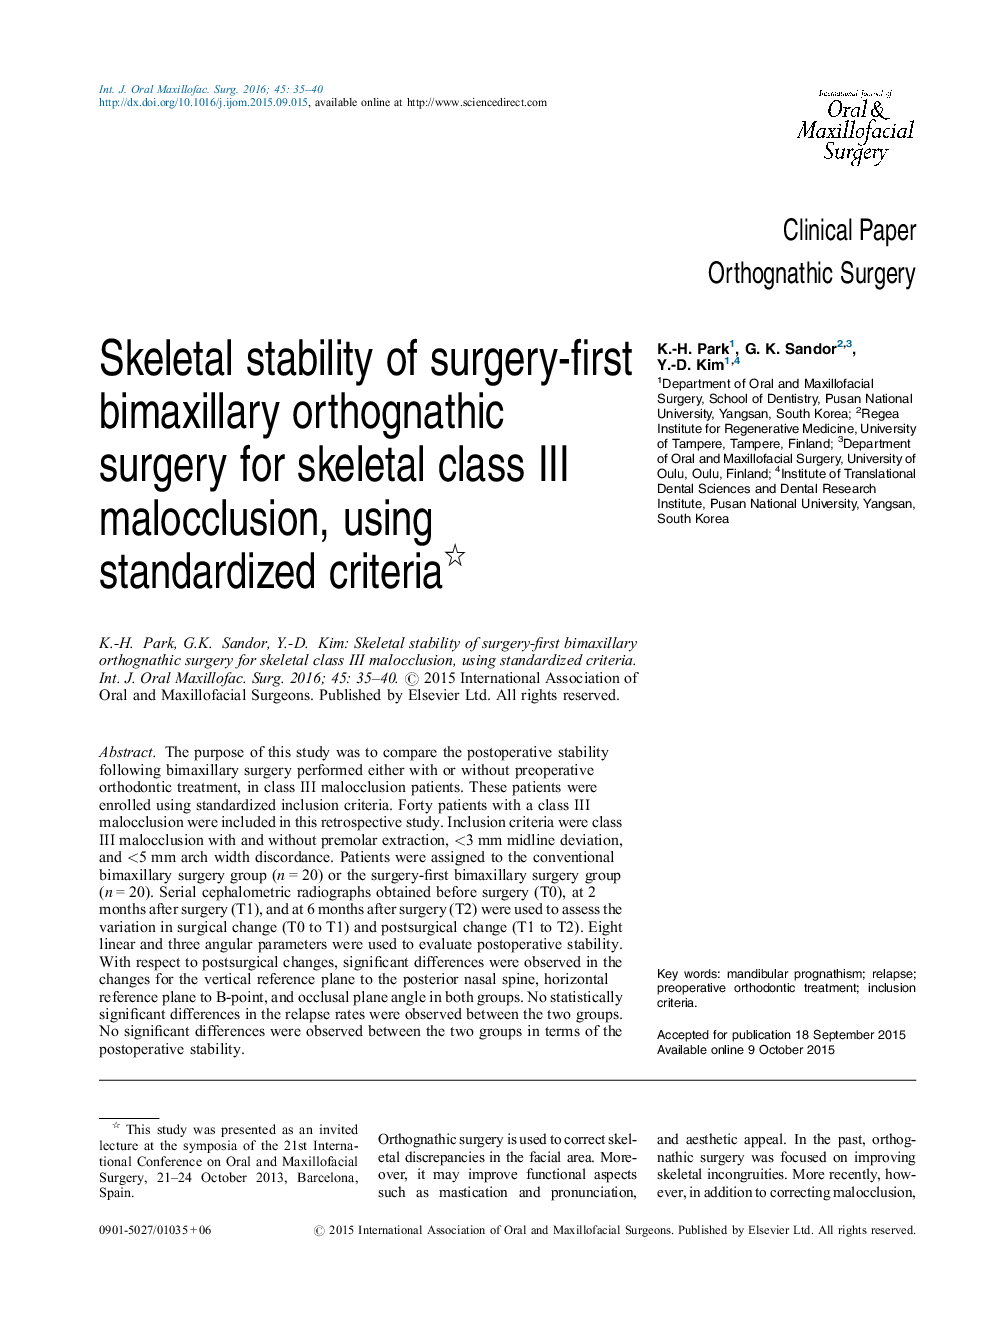 Skeletal stability of surgery-first bimaxillary orthognathic surgery for skeletal class III malocclusion, using standardized criteria 